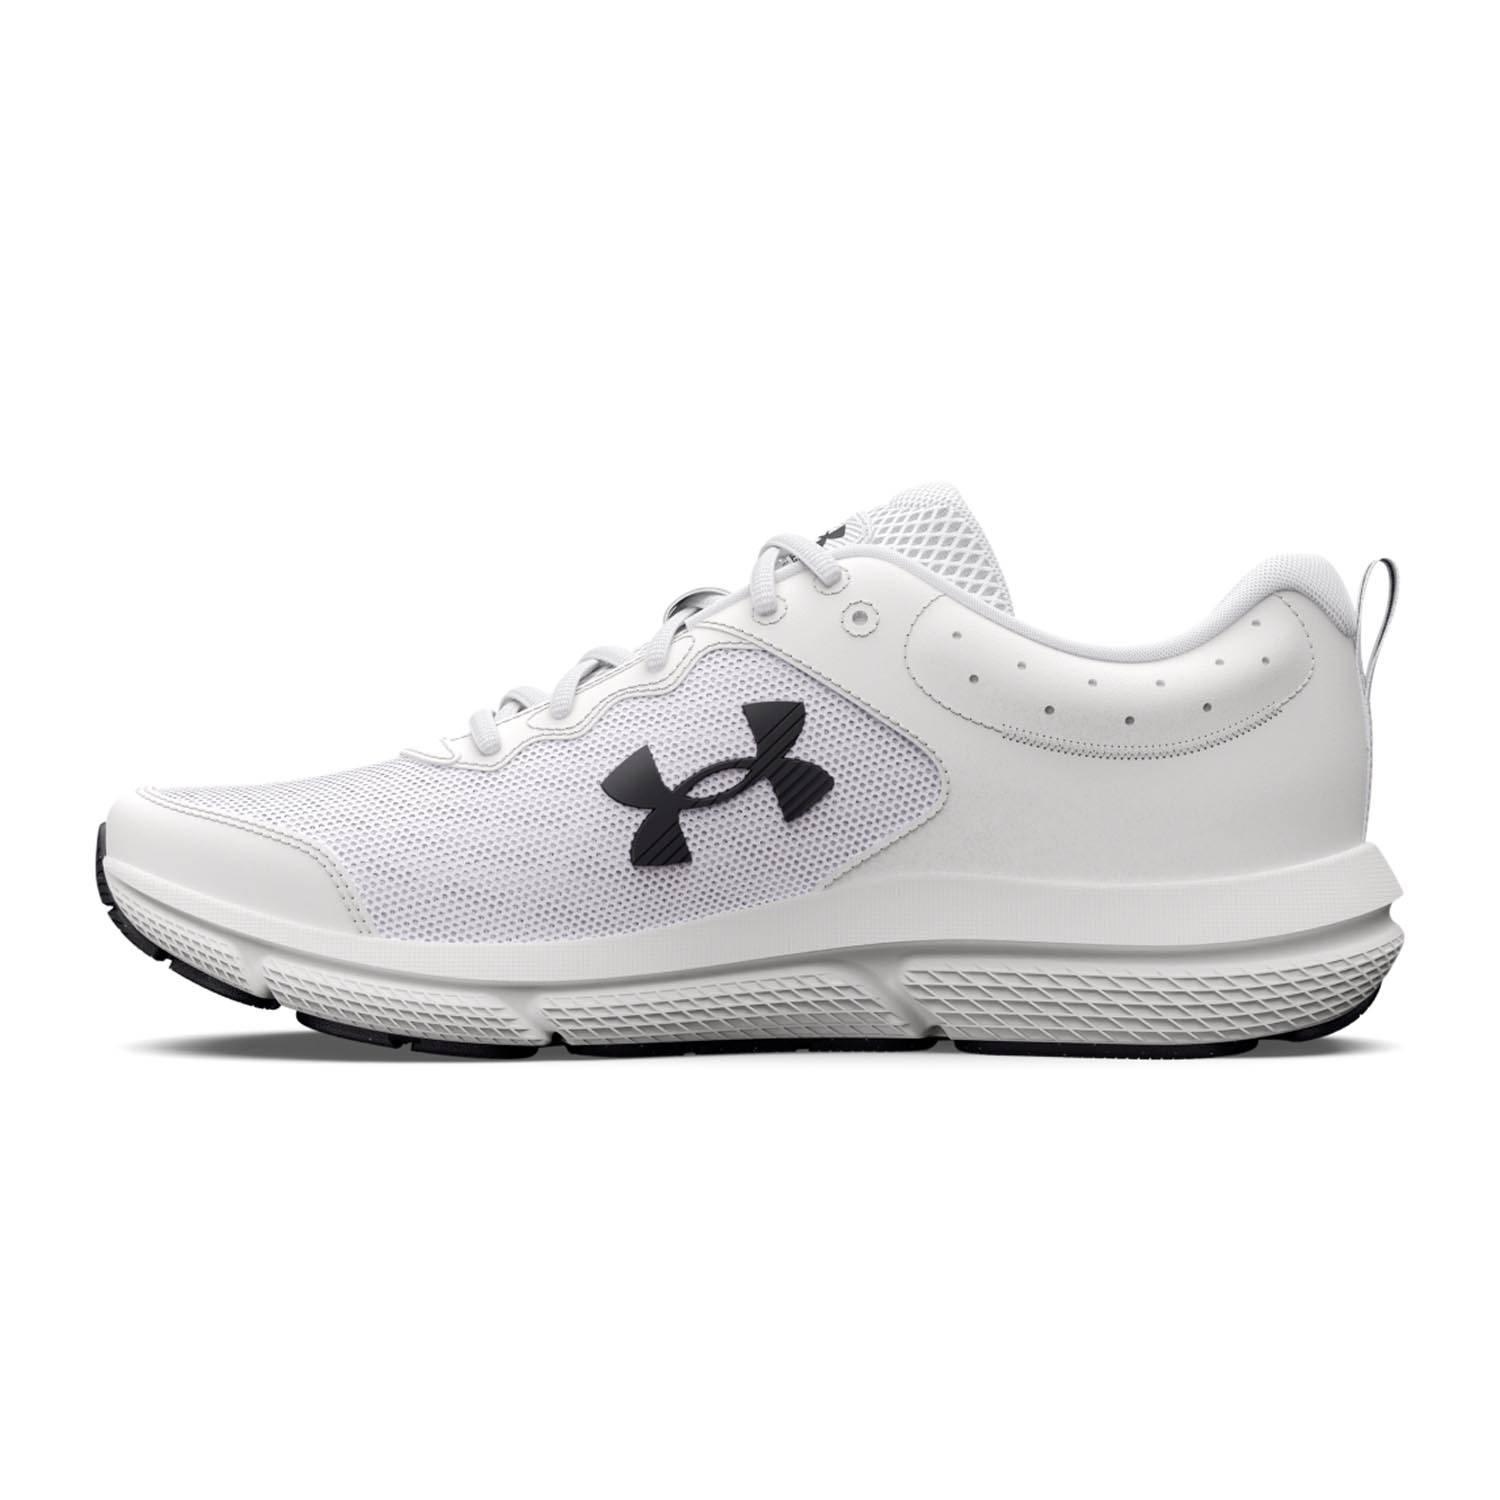 Under Armour Women's Charged Assert 10 Shoes